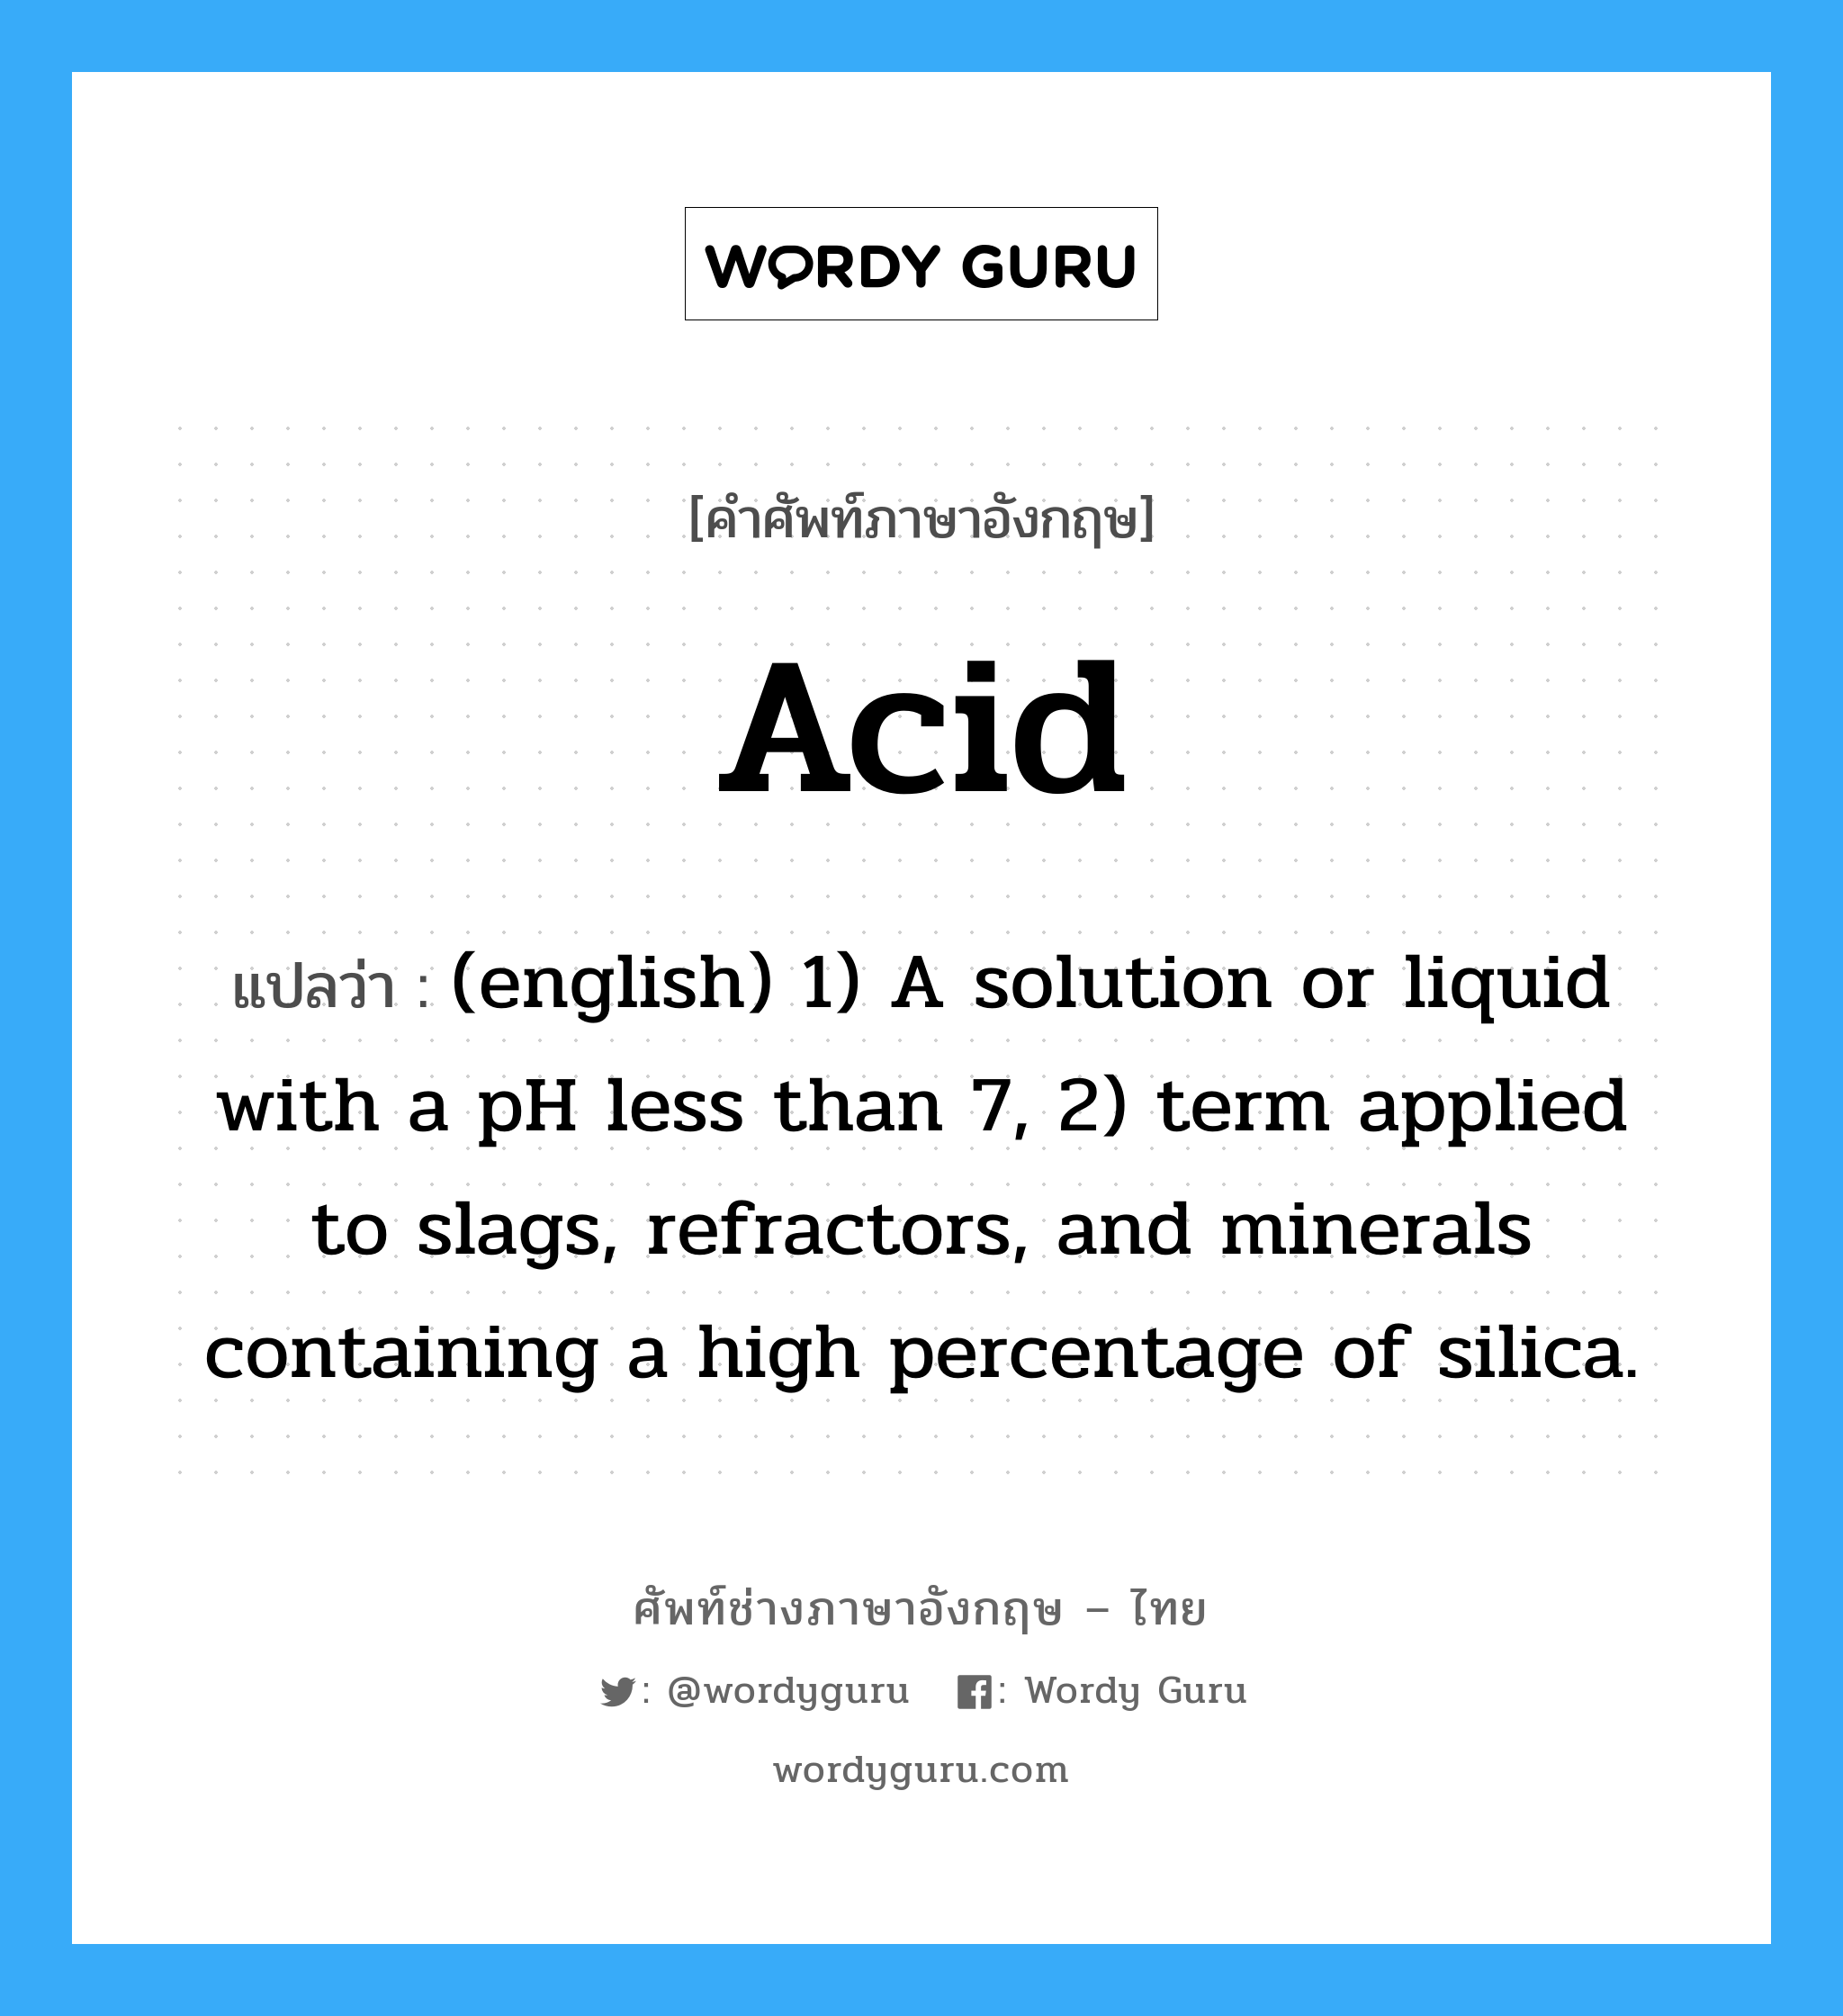 Acid แปลว่า?, คำศัพท์ช่างภาษาอังกฤษ - ไทย Acid คำศัพท์ภาษาอังกฤษ Acid แปลว่า (english) 1) A solution or liquid with a pH less than 7, 2) term applied to slags, refractors, and minerals containing a high percentage of silica.